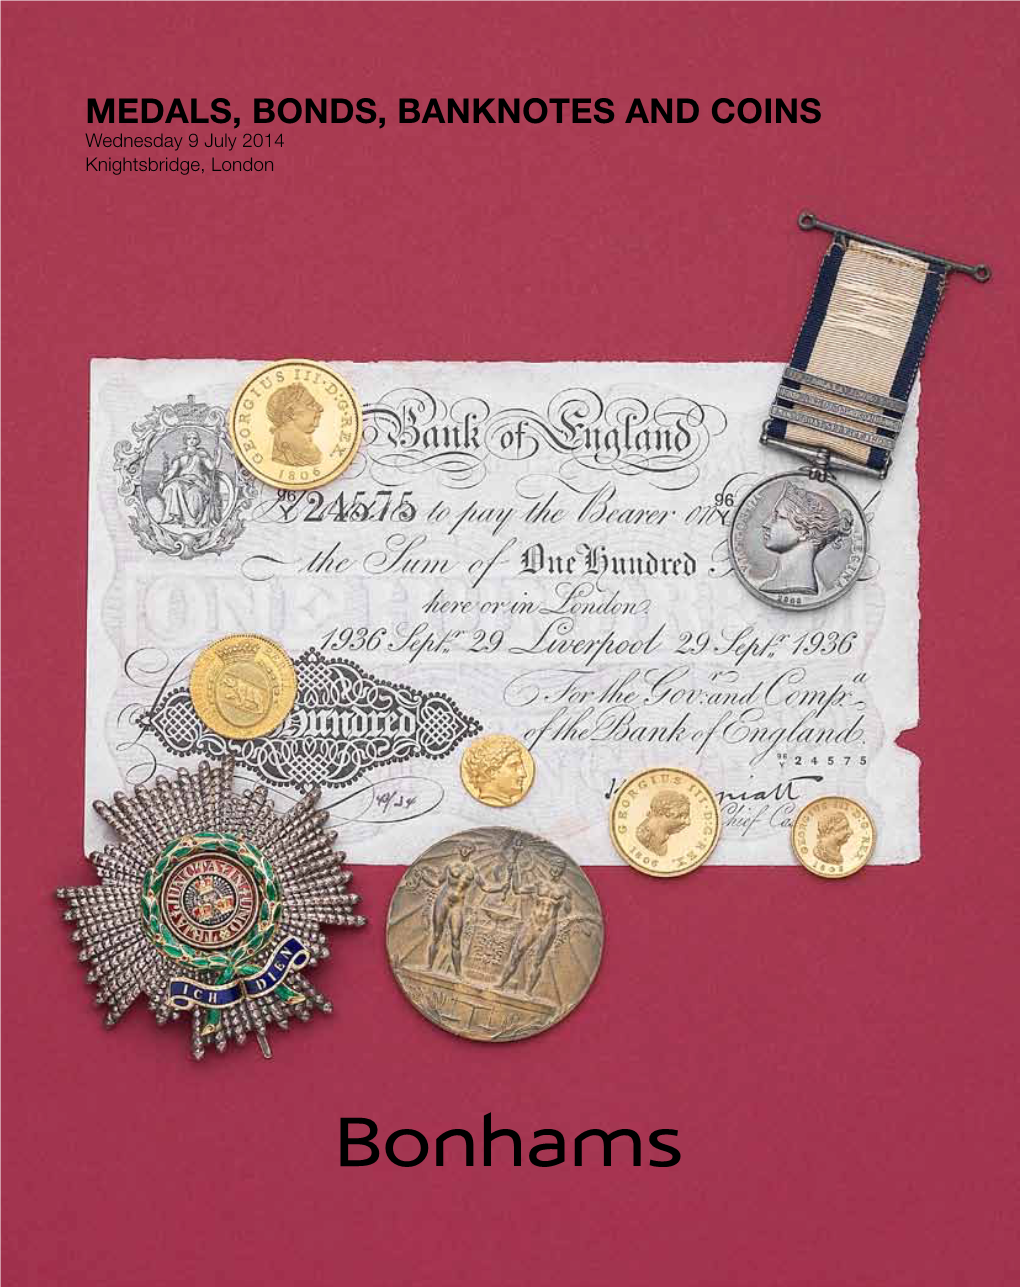 Medals, Bonds, Banknotes and Coins Wednesday 9 July 2014 Knightsbridge, London Medals, Bonds, Banknotes and Coins | Knightsbridge, London Wednesday 9 July 2014 ?????